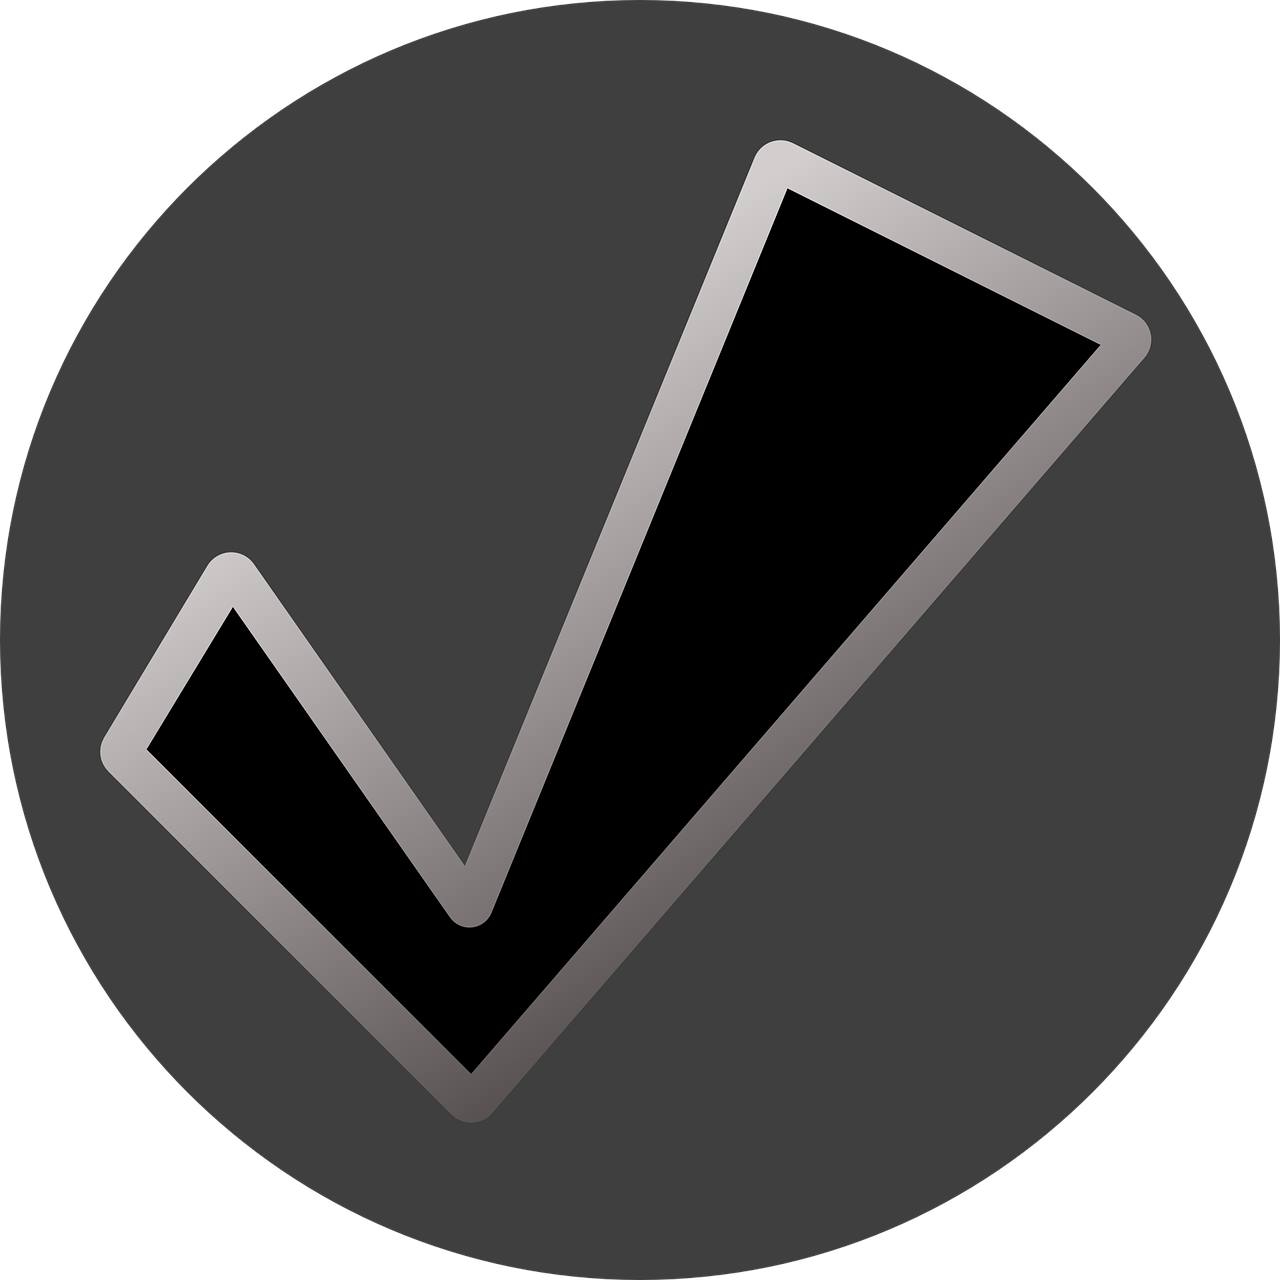 Checkmark Icon Graphic PNG image